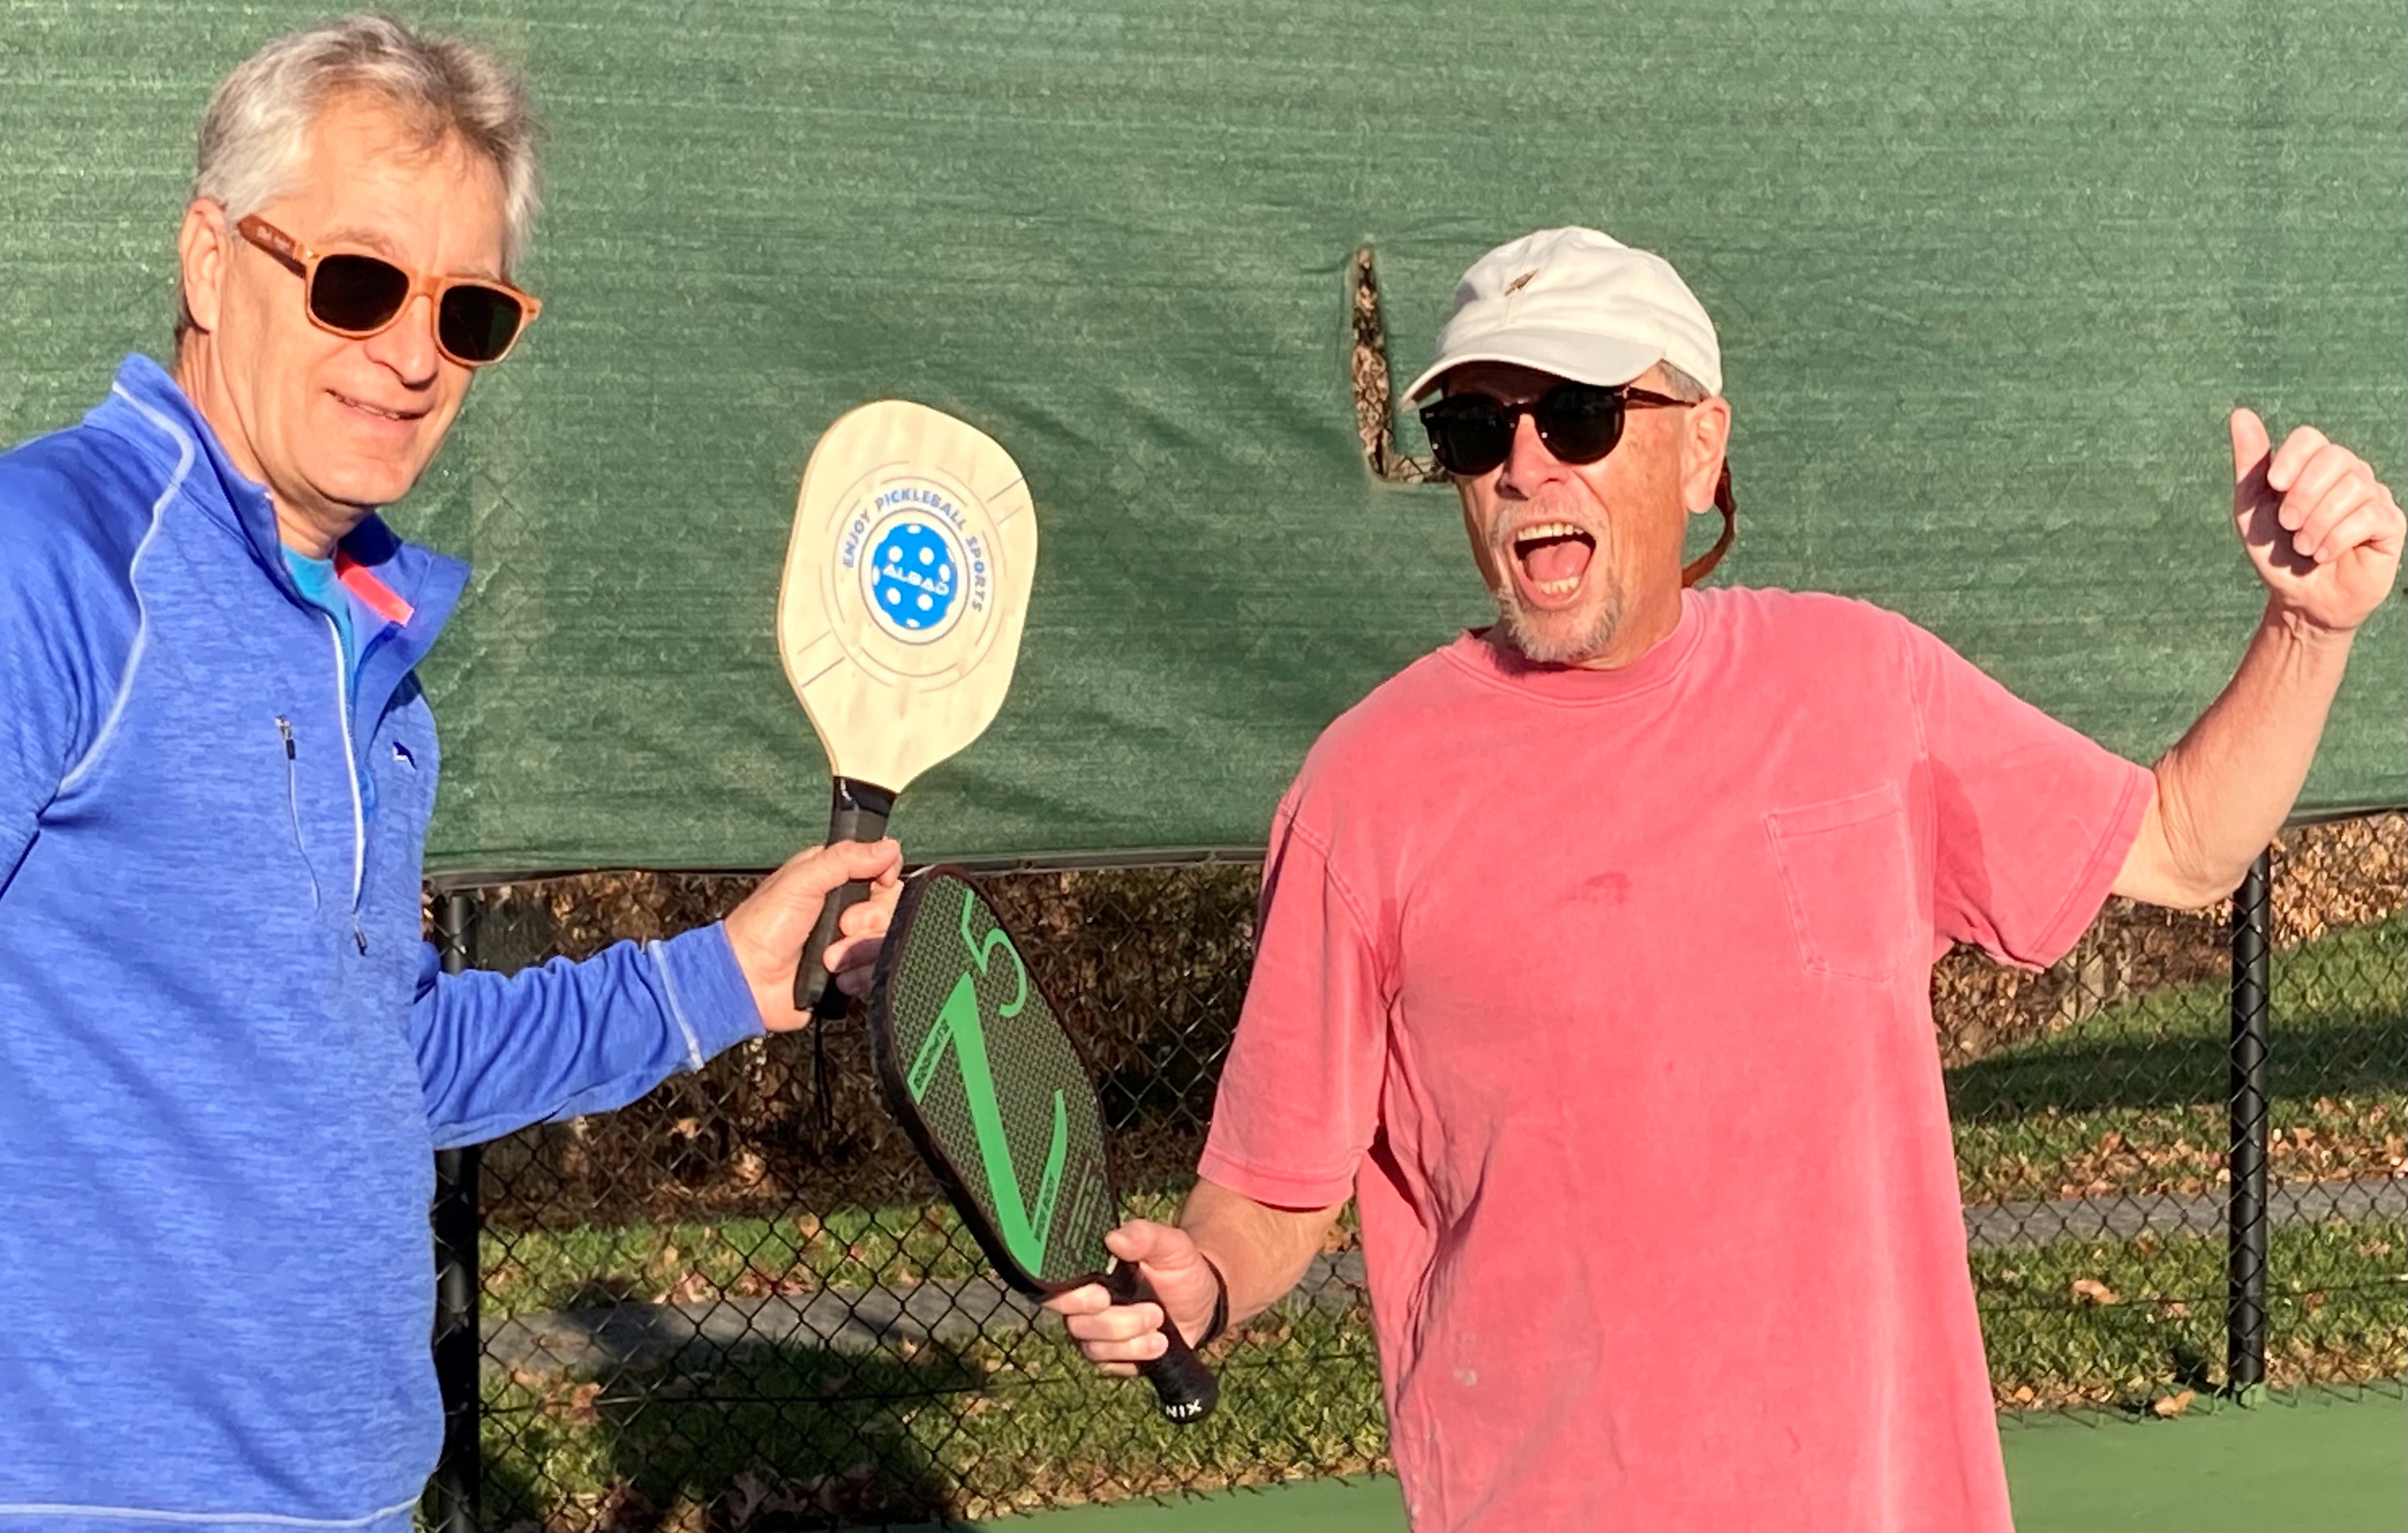 Pickleball is fun, social and friendly!